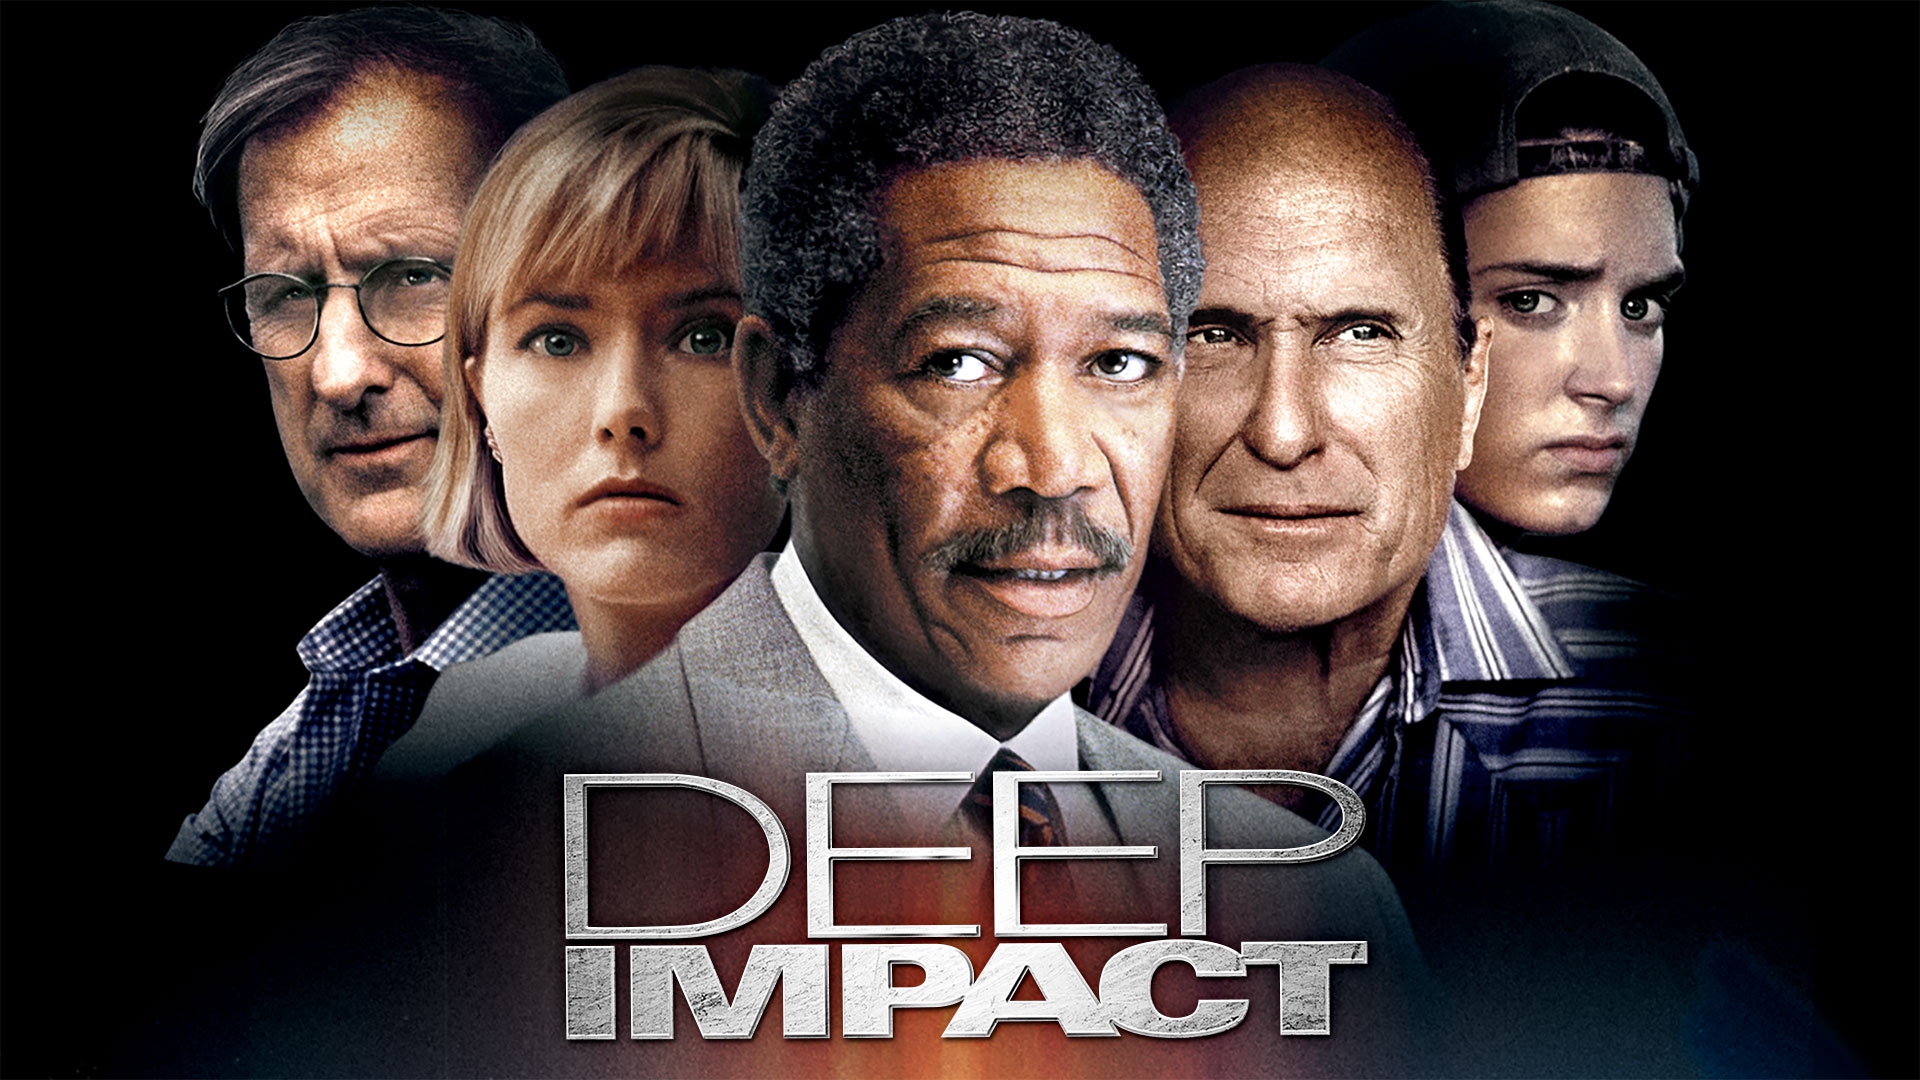 Stream Deep Impact Online Download And Watch Hd Movies Stan